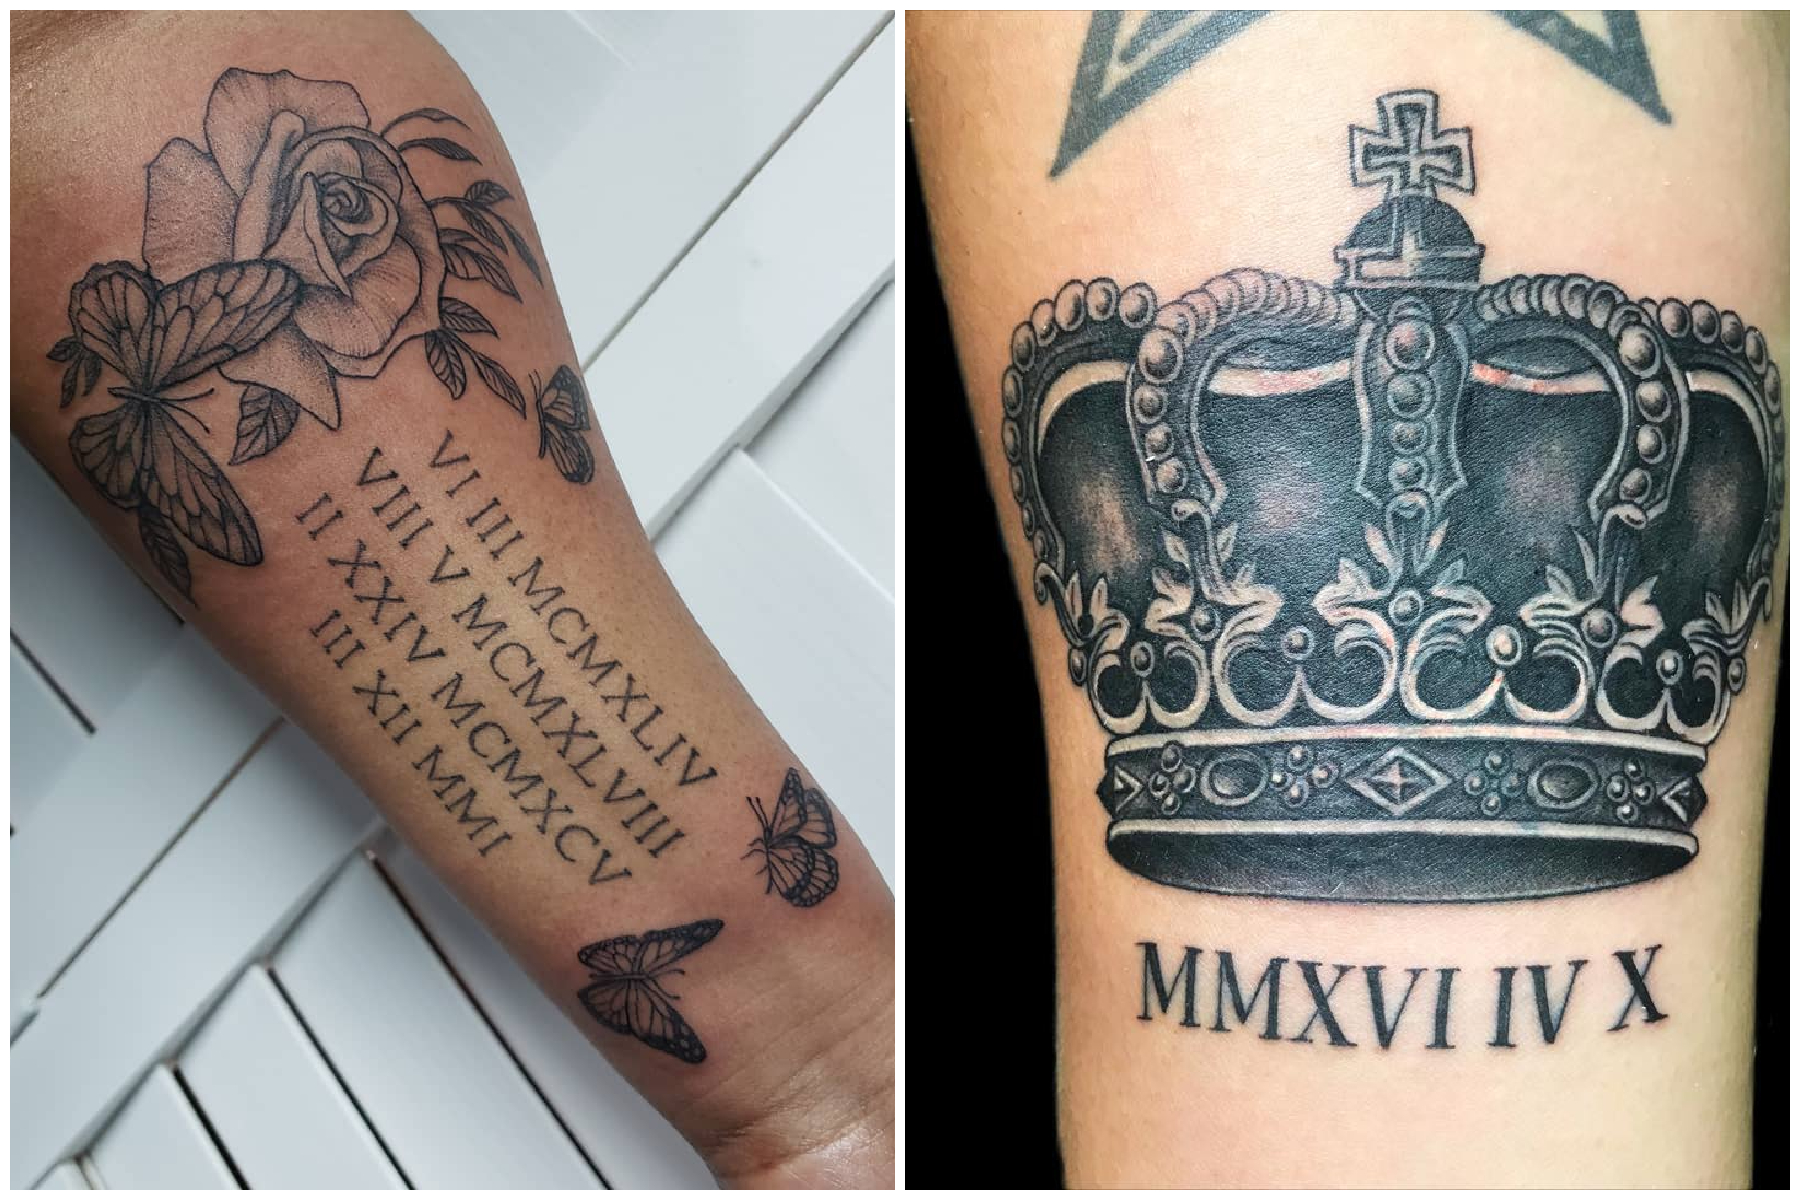 30 incredible Roman numerals tattoo designs to try and their meaning